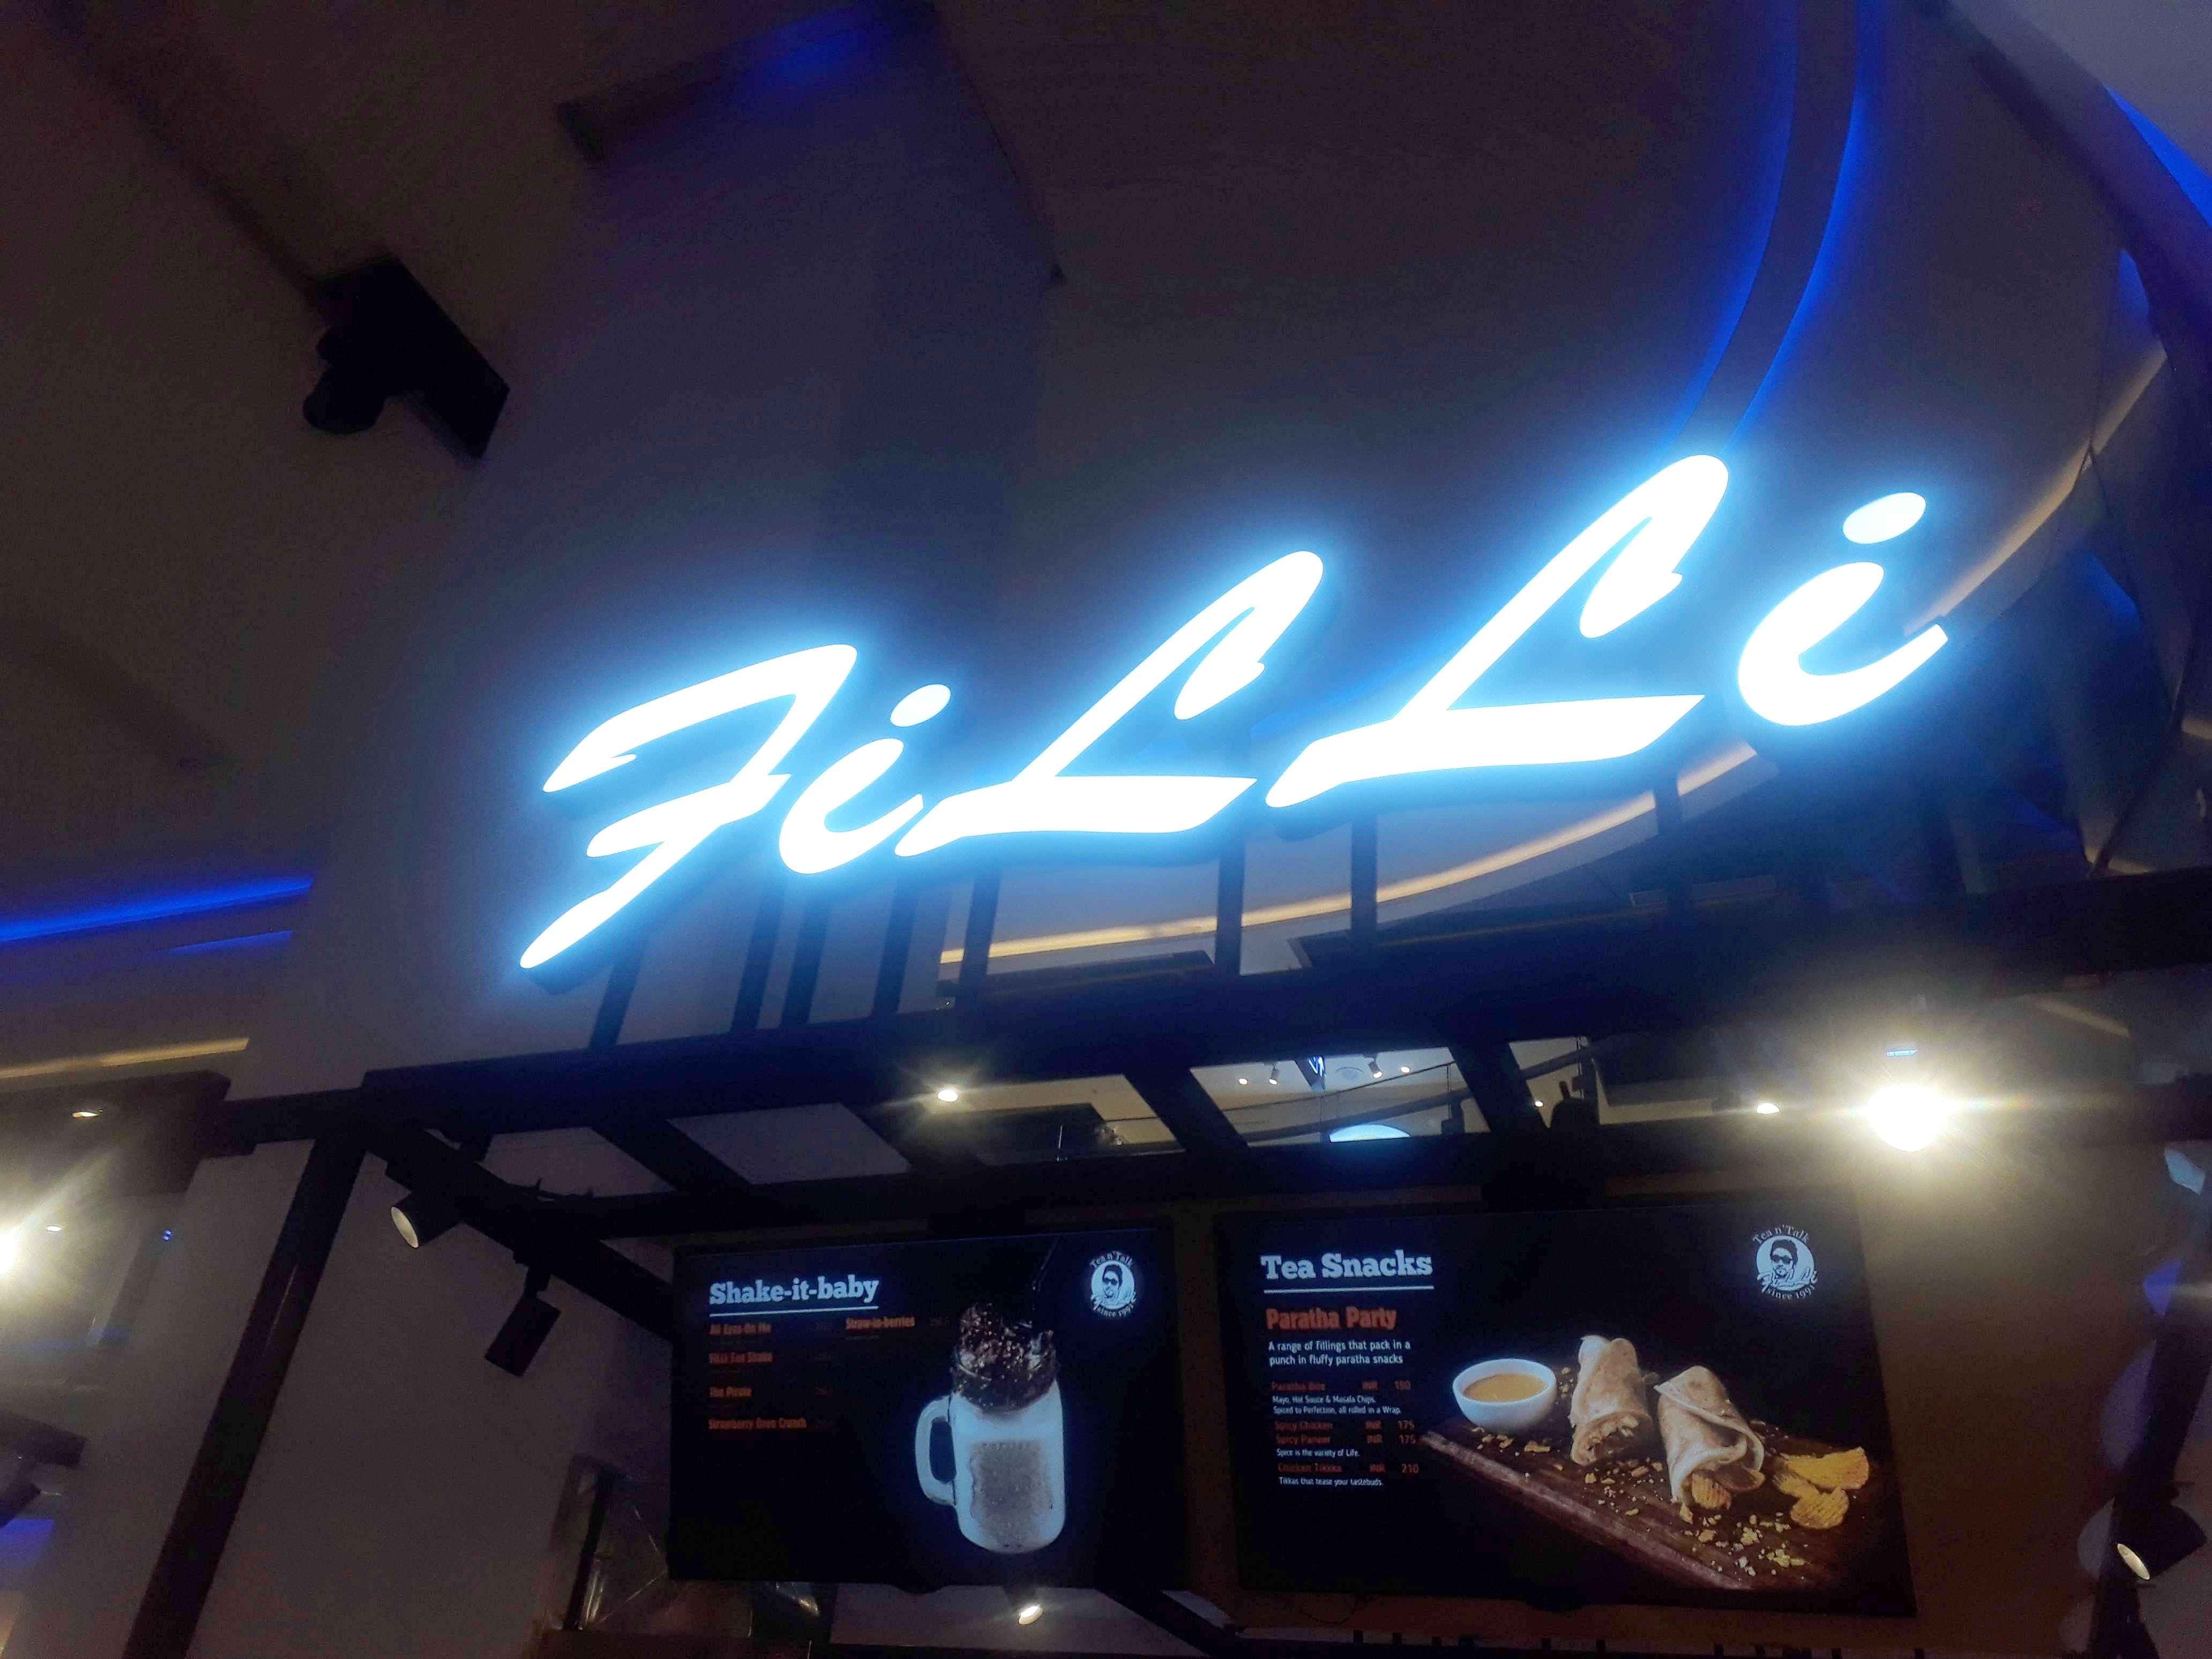 Neon,Light,Lighting,Electronic signage,Signage,Technology,Neon sign,Visual effect lighting,Electric blue,Electronic device